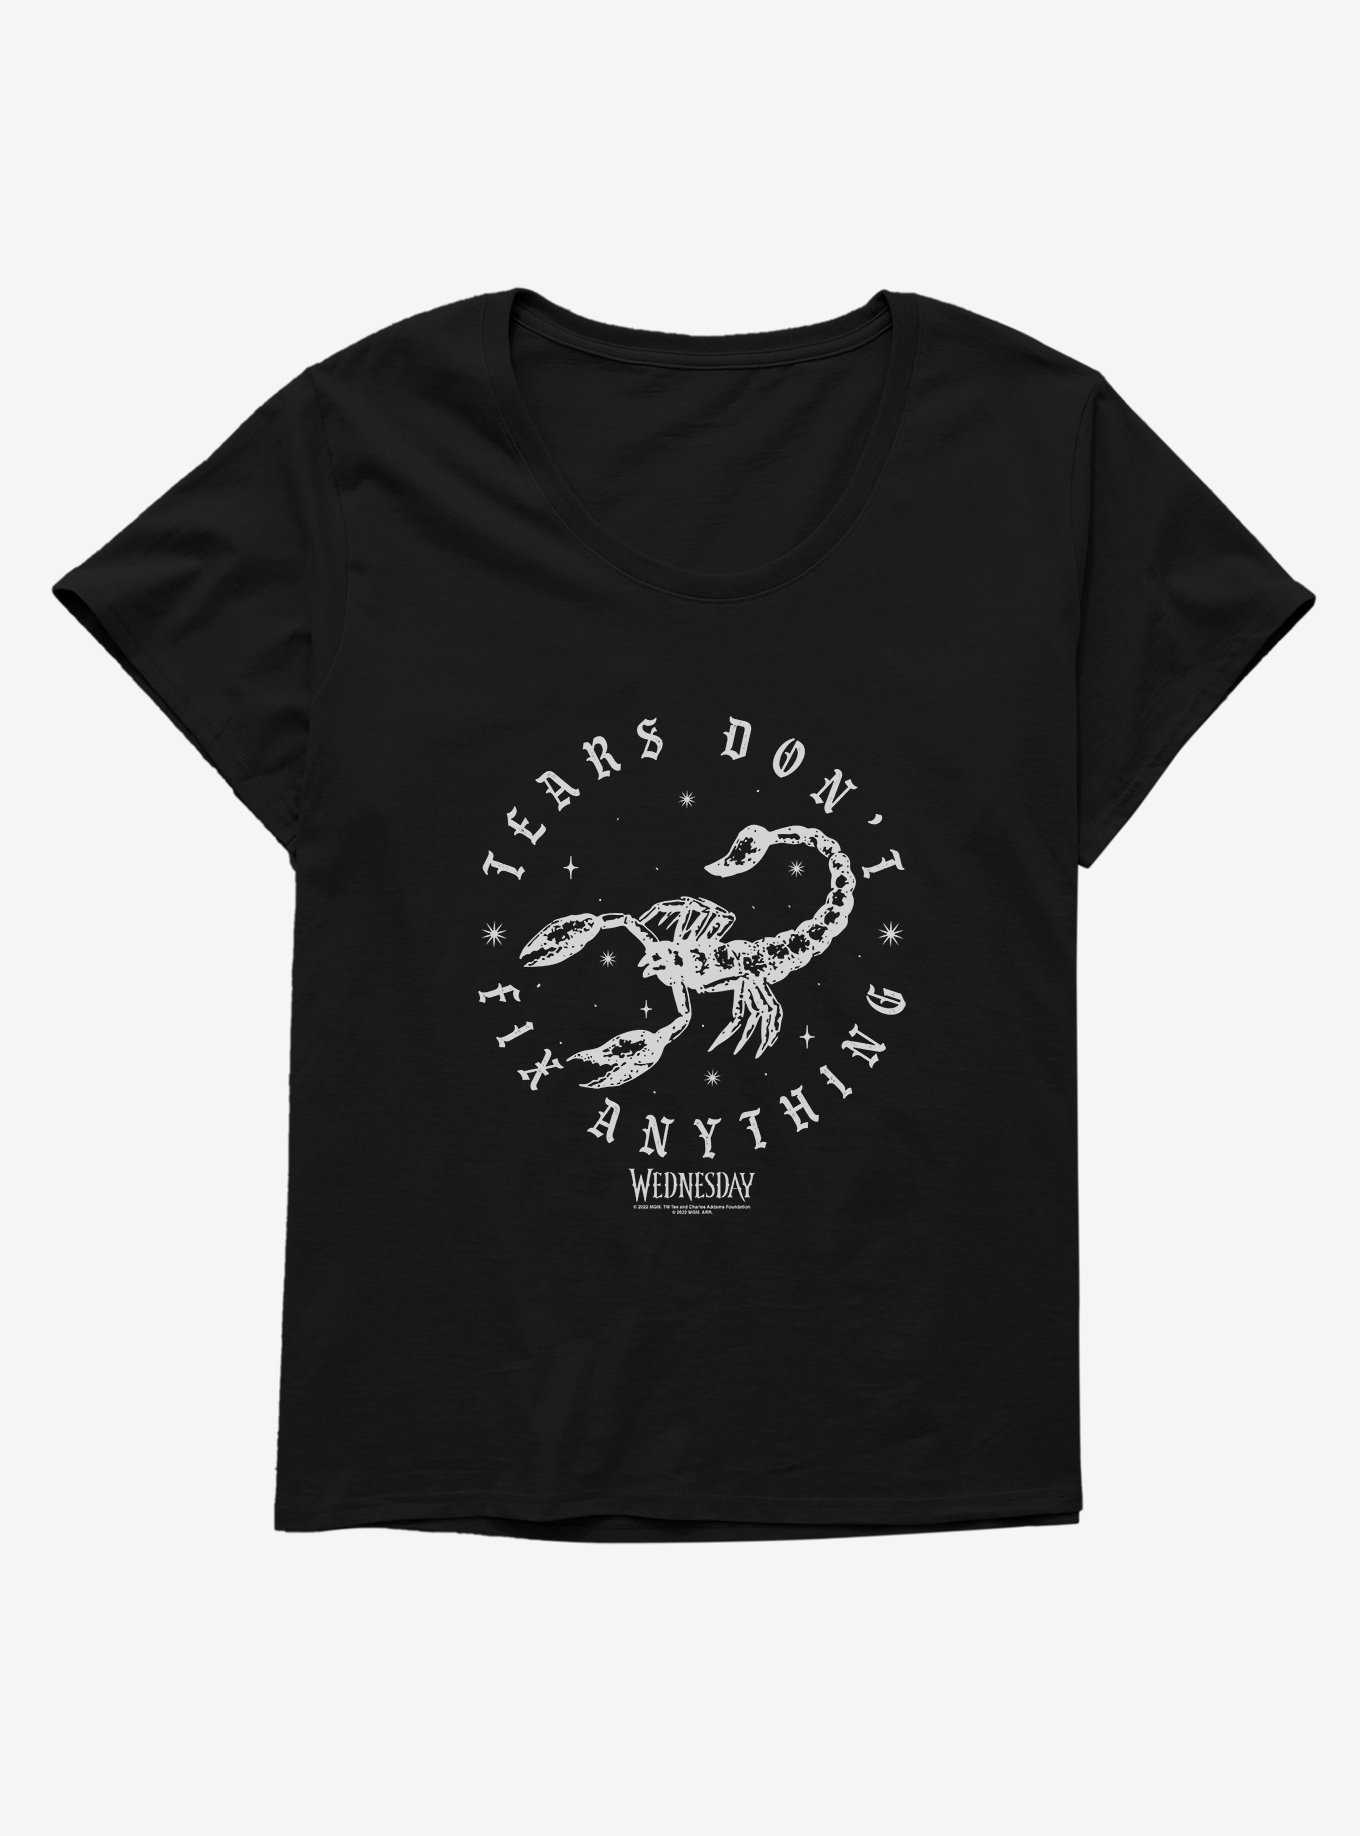 Wednesday Tears Don't Fix Anything Girls T-Shirt Plus Size, , hi-res